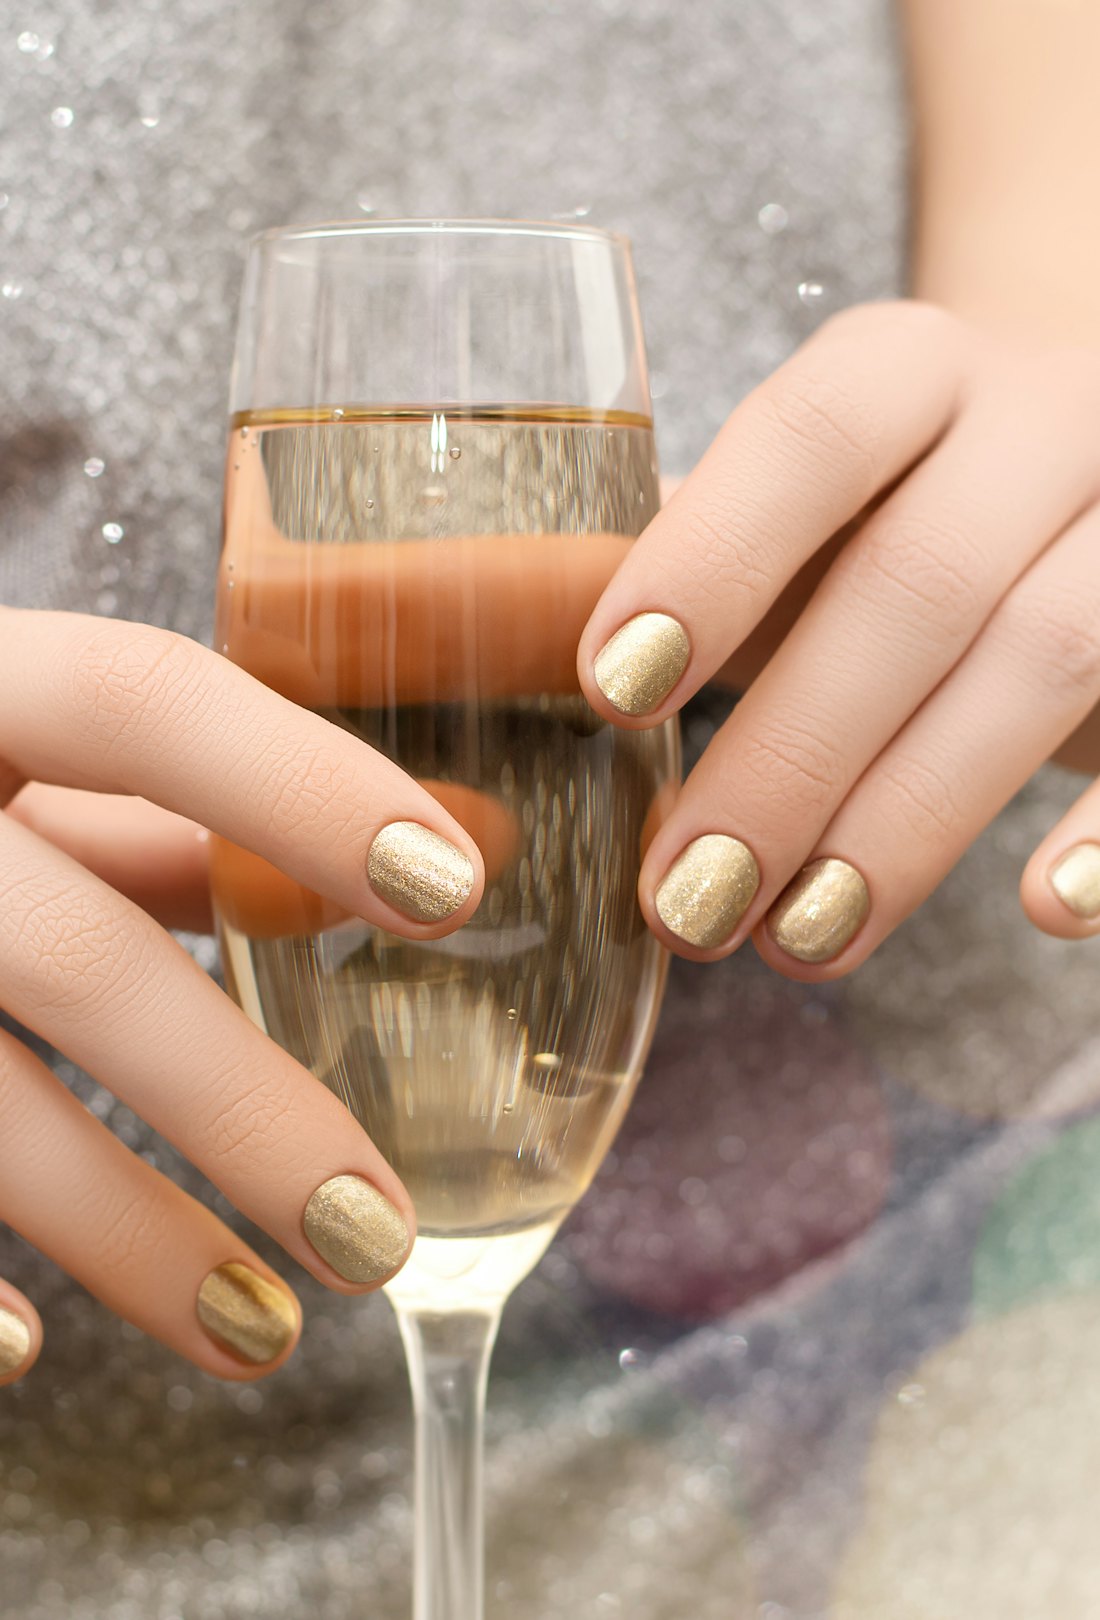 Hands holding a champagne glass with gold nail polish, an idea for NYE nails.